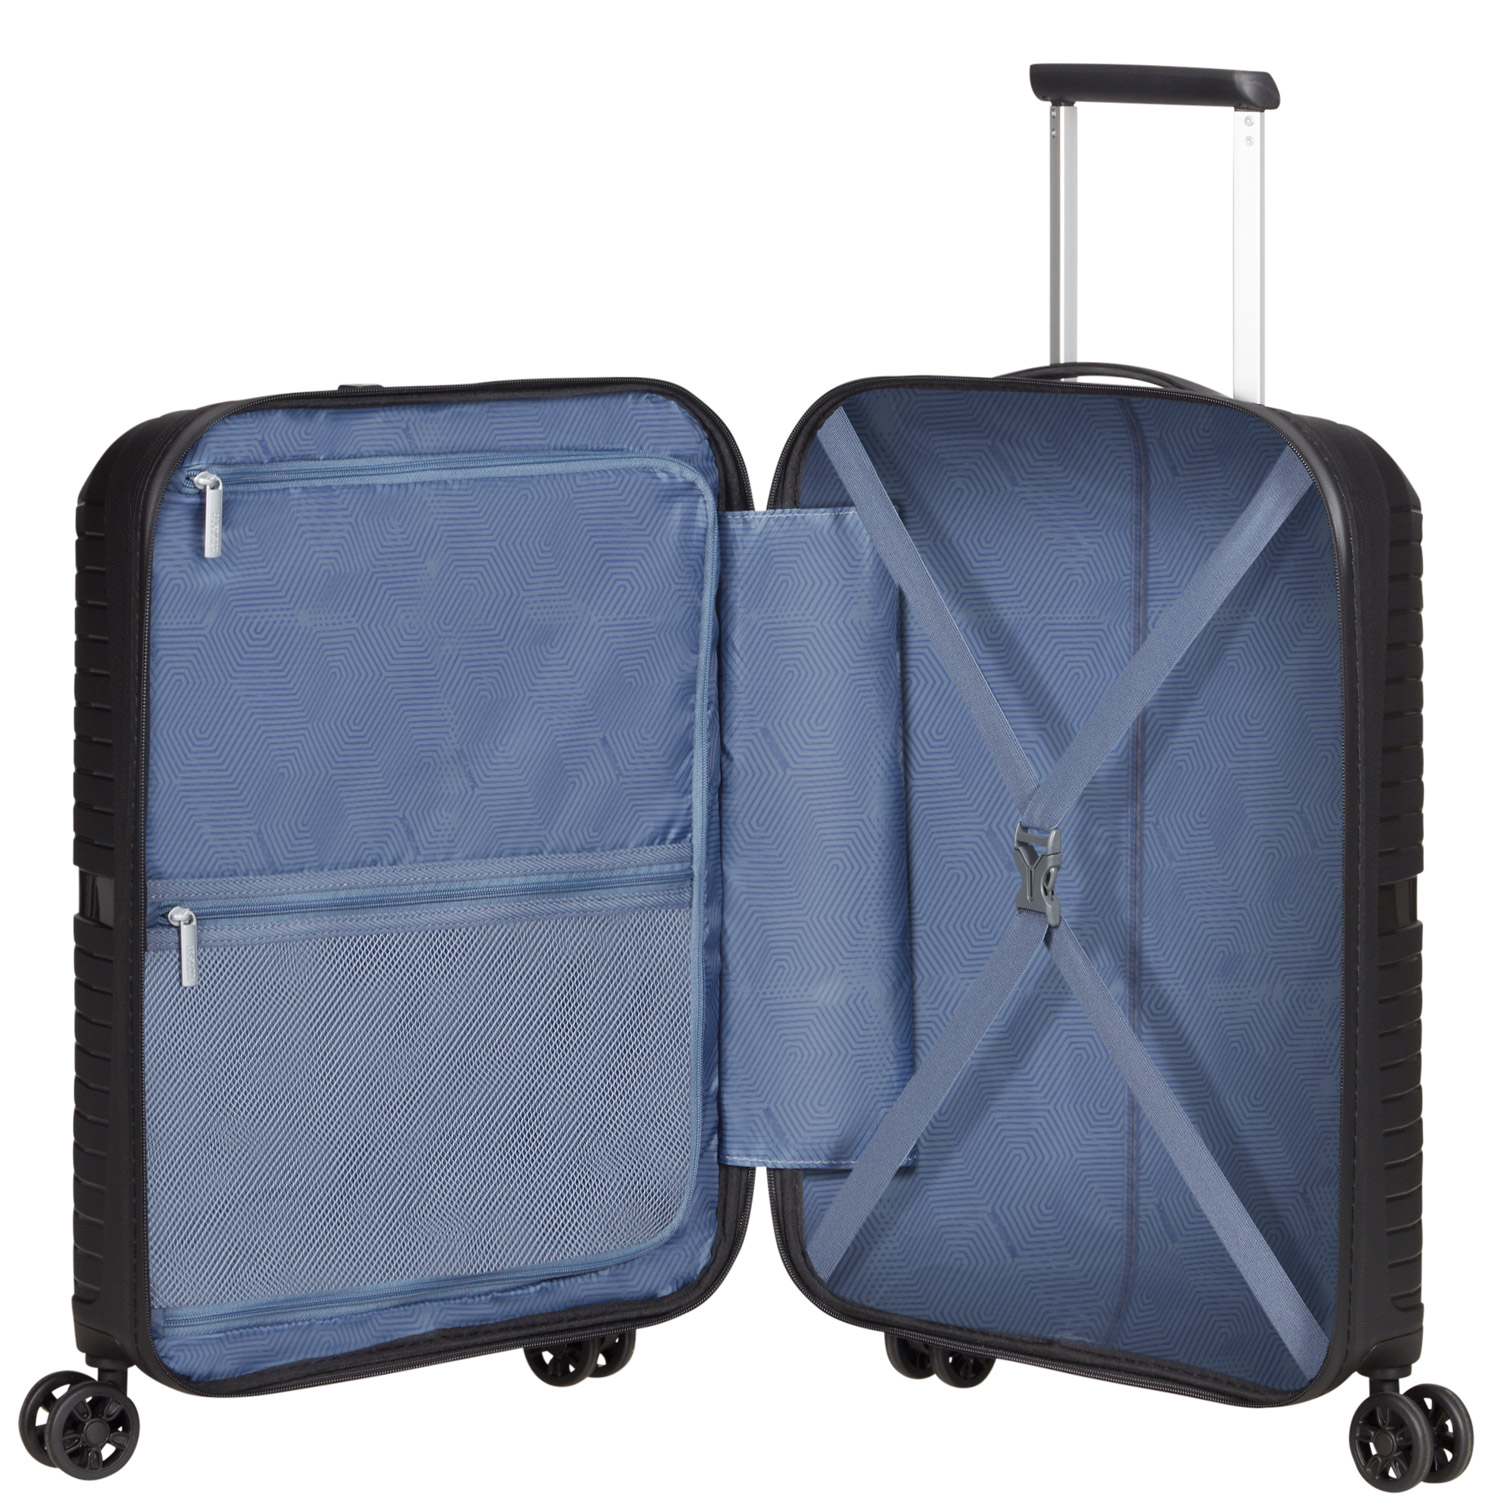 American Tourister Koffer mit 4 Rollen 55cm Airconic onyx black